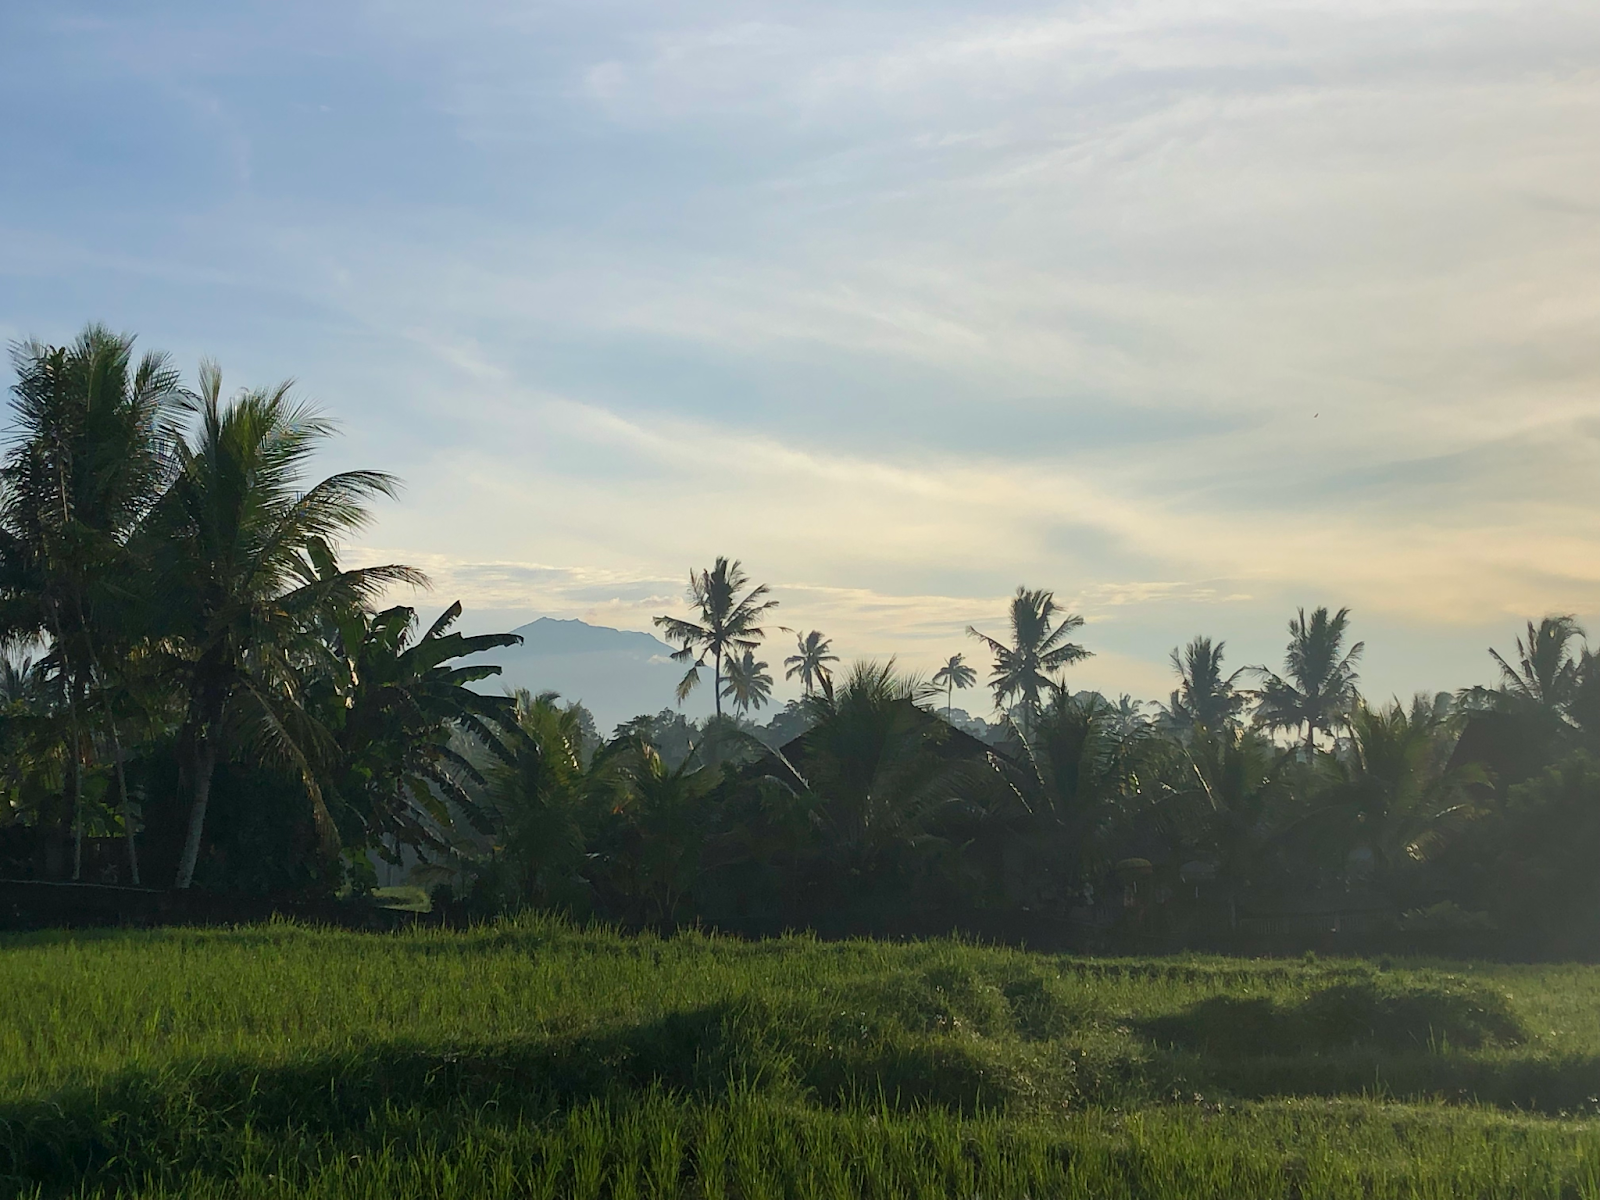 Morning landscape, with mountains, palm trees, and rice fields.